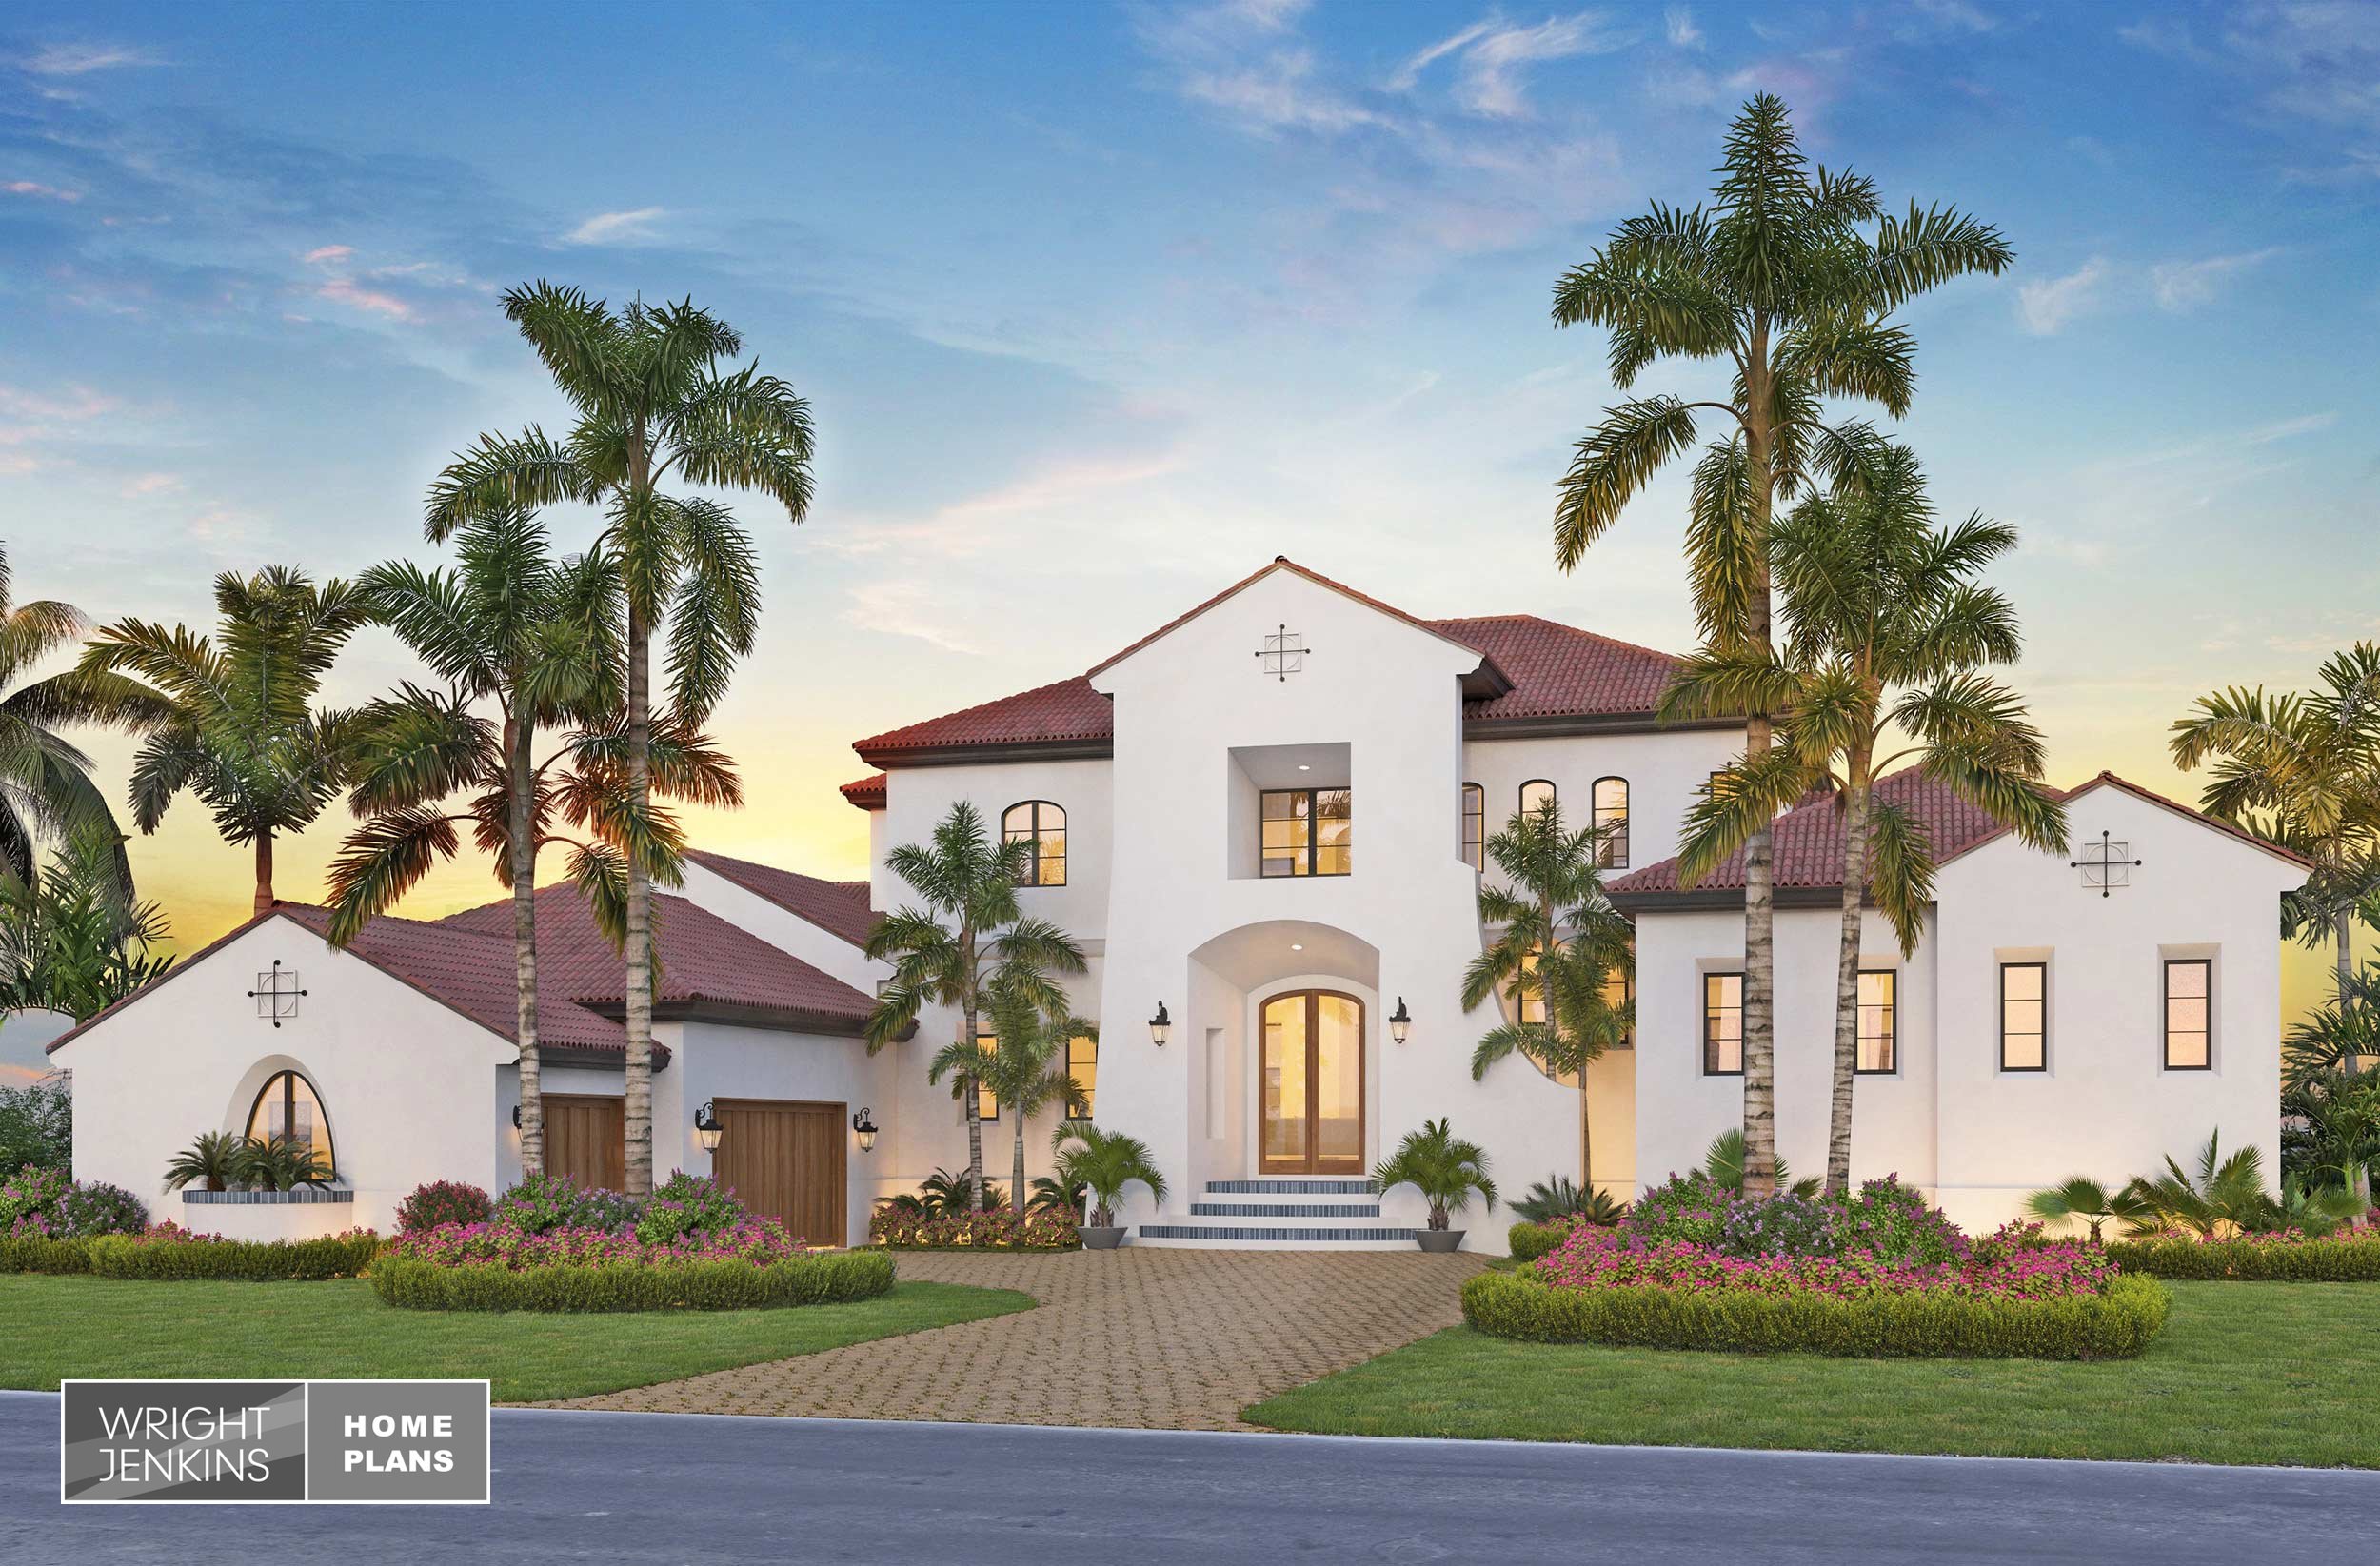    Featured Plan: Caliza Home Plan #931   